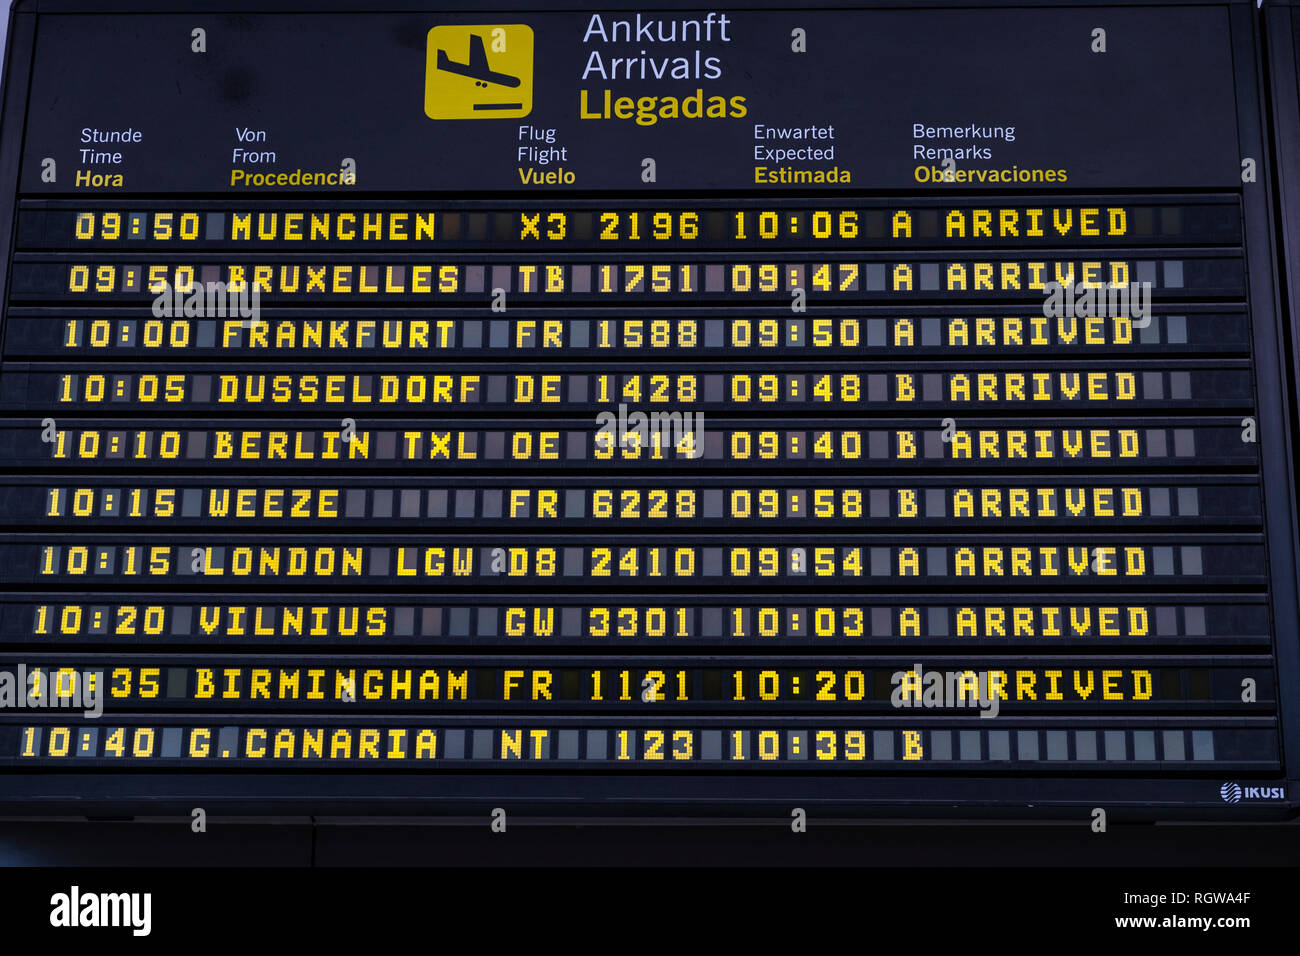 Arrivals timetable notification board at Reina Sofia Tenerife south airport, Canary Islands, Spain Stock Photo